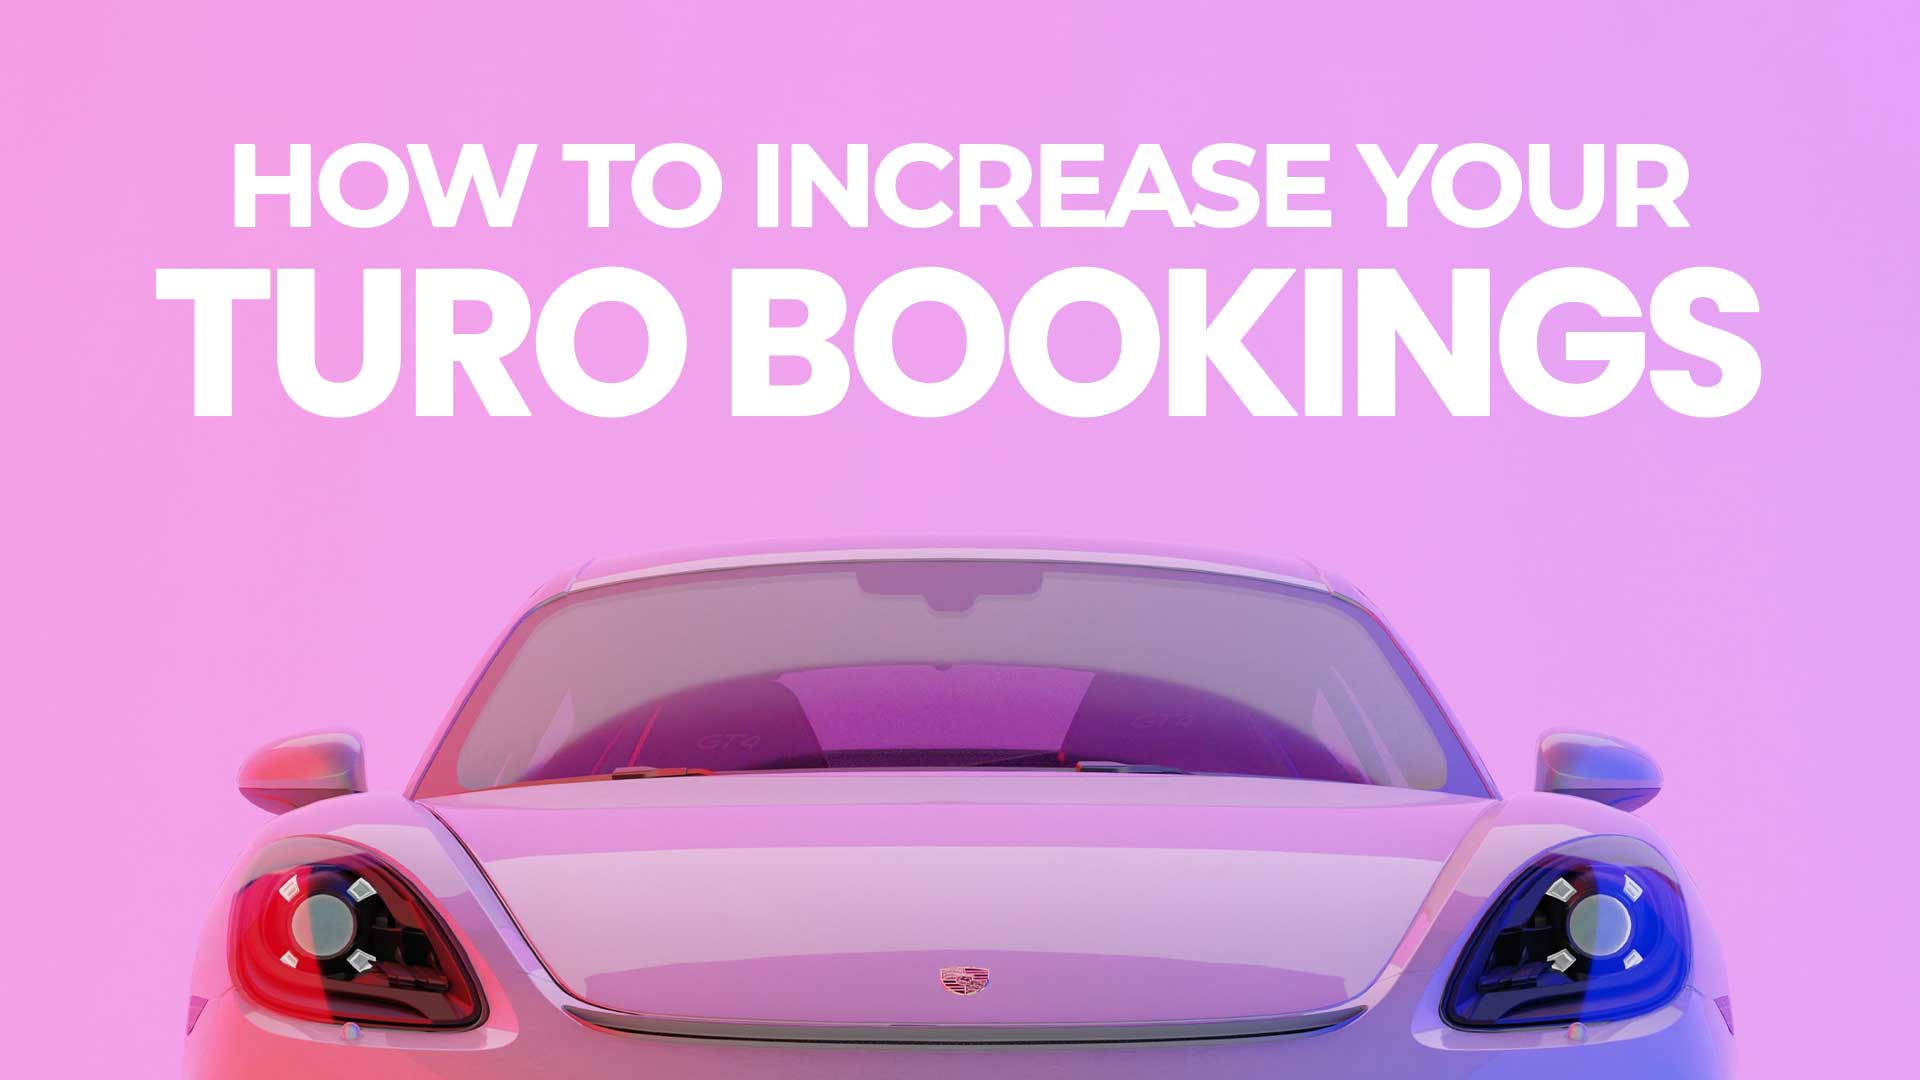 5 Ways To Increase Your Turo Bookings